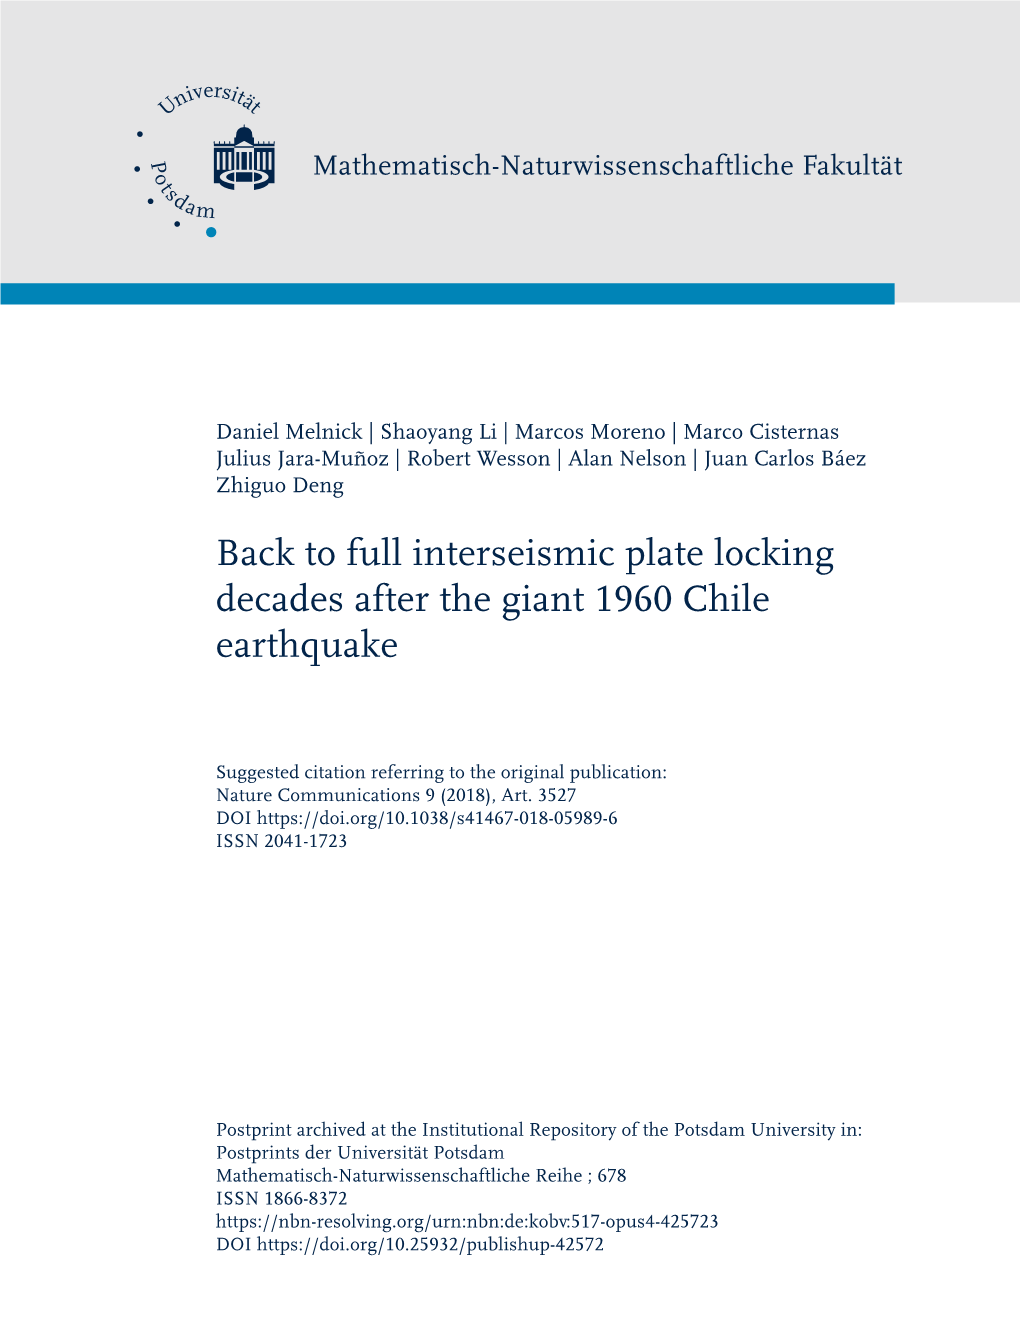 Full Interseismic Plate Locking Decades After the Giant 1960 Chile Earthquake